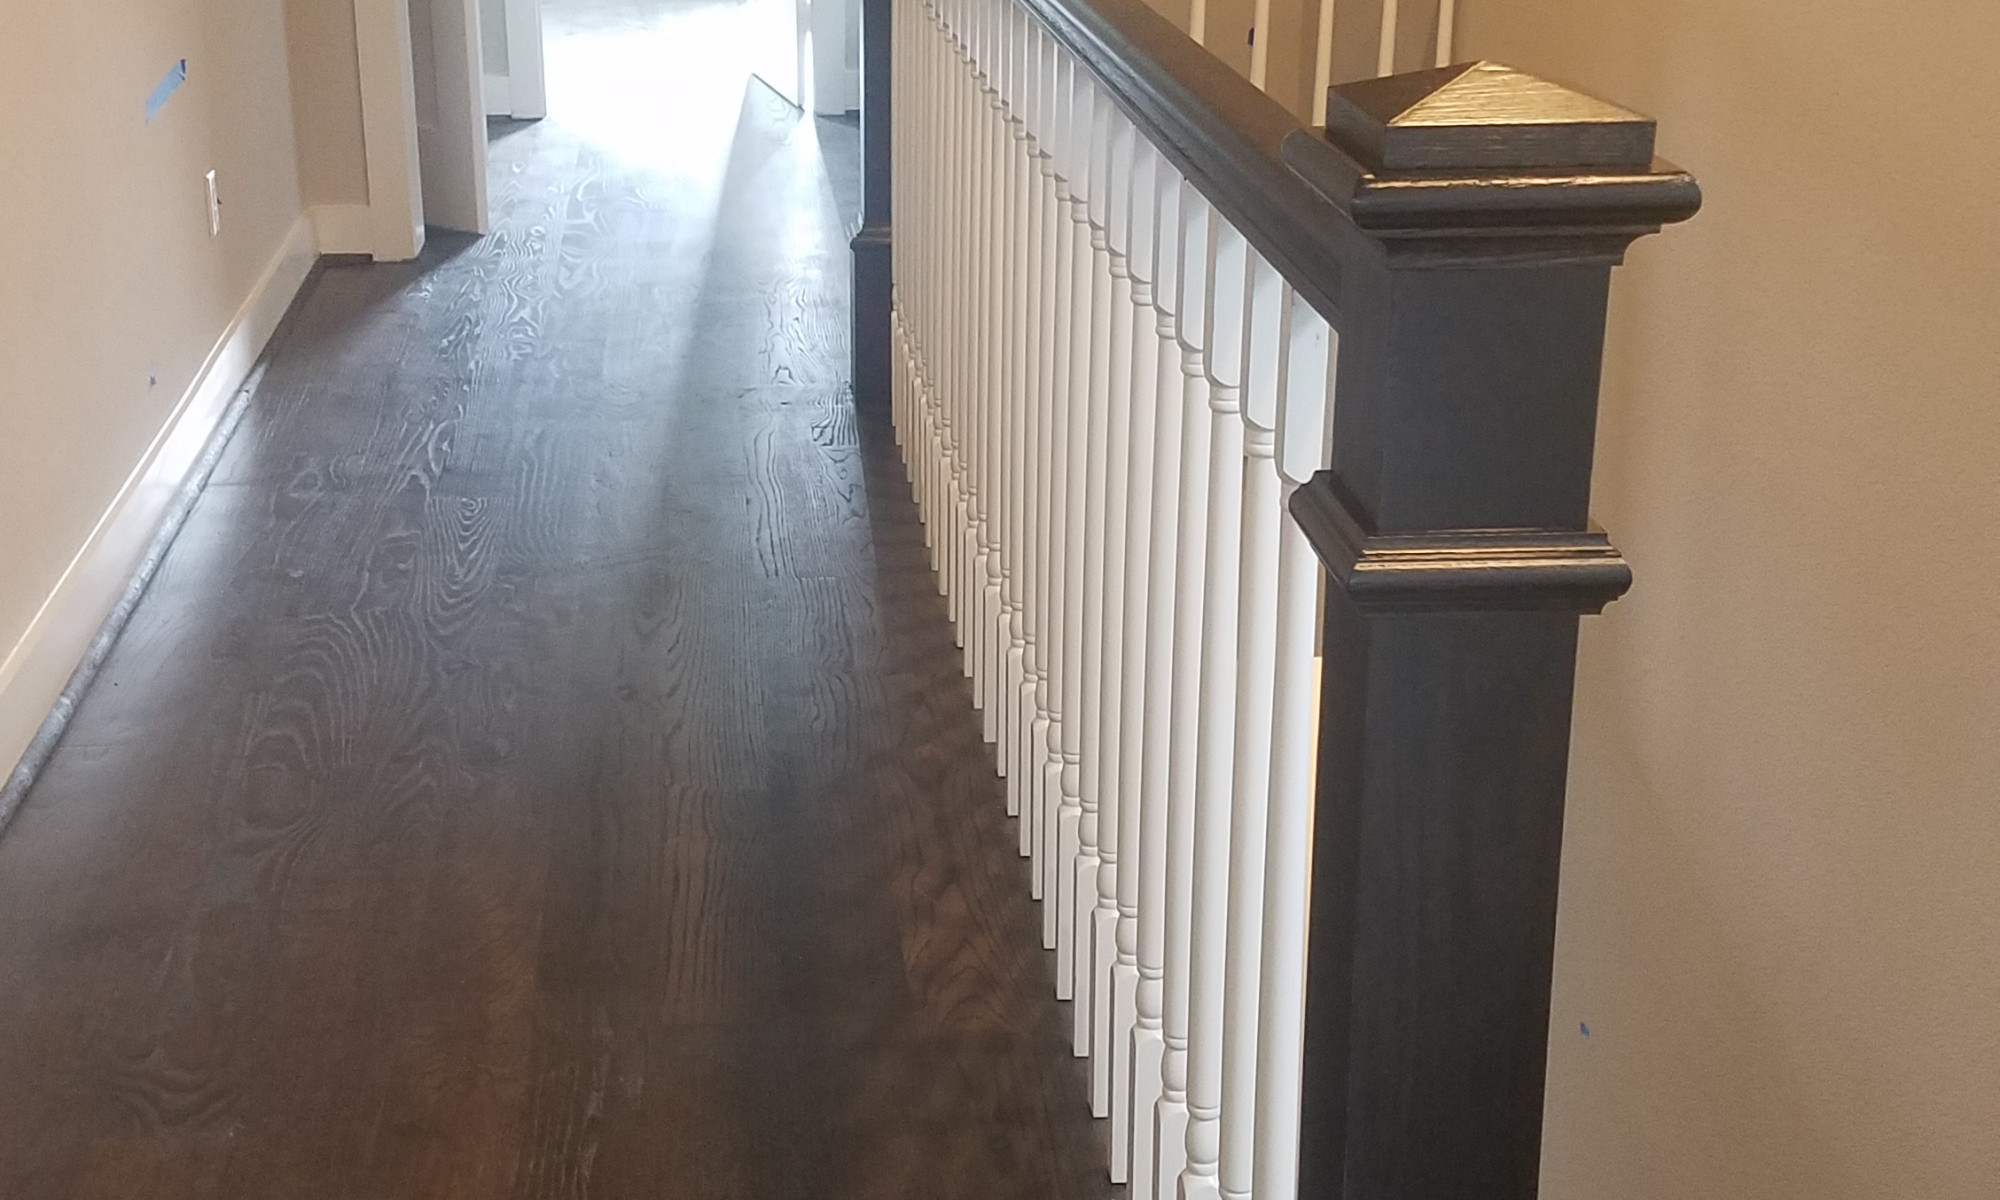 17 Lovely Price Per Sq Ft to Refinish Hardwood Floors 2024 free download price per sq ft to refinish hardwood floors of refinishing hardwood flooring company pertaining to wood floor refinished or wooden floor refinishing we can sand re stain your older wood floo